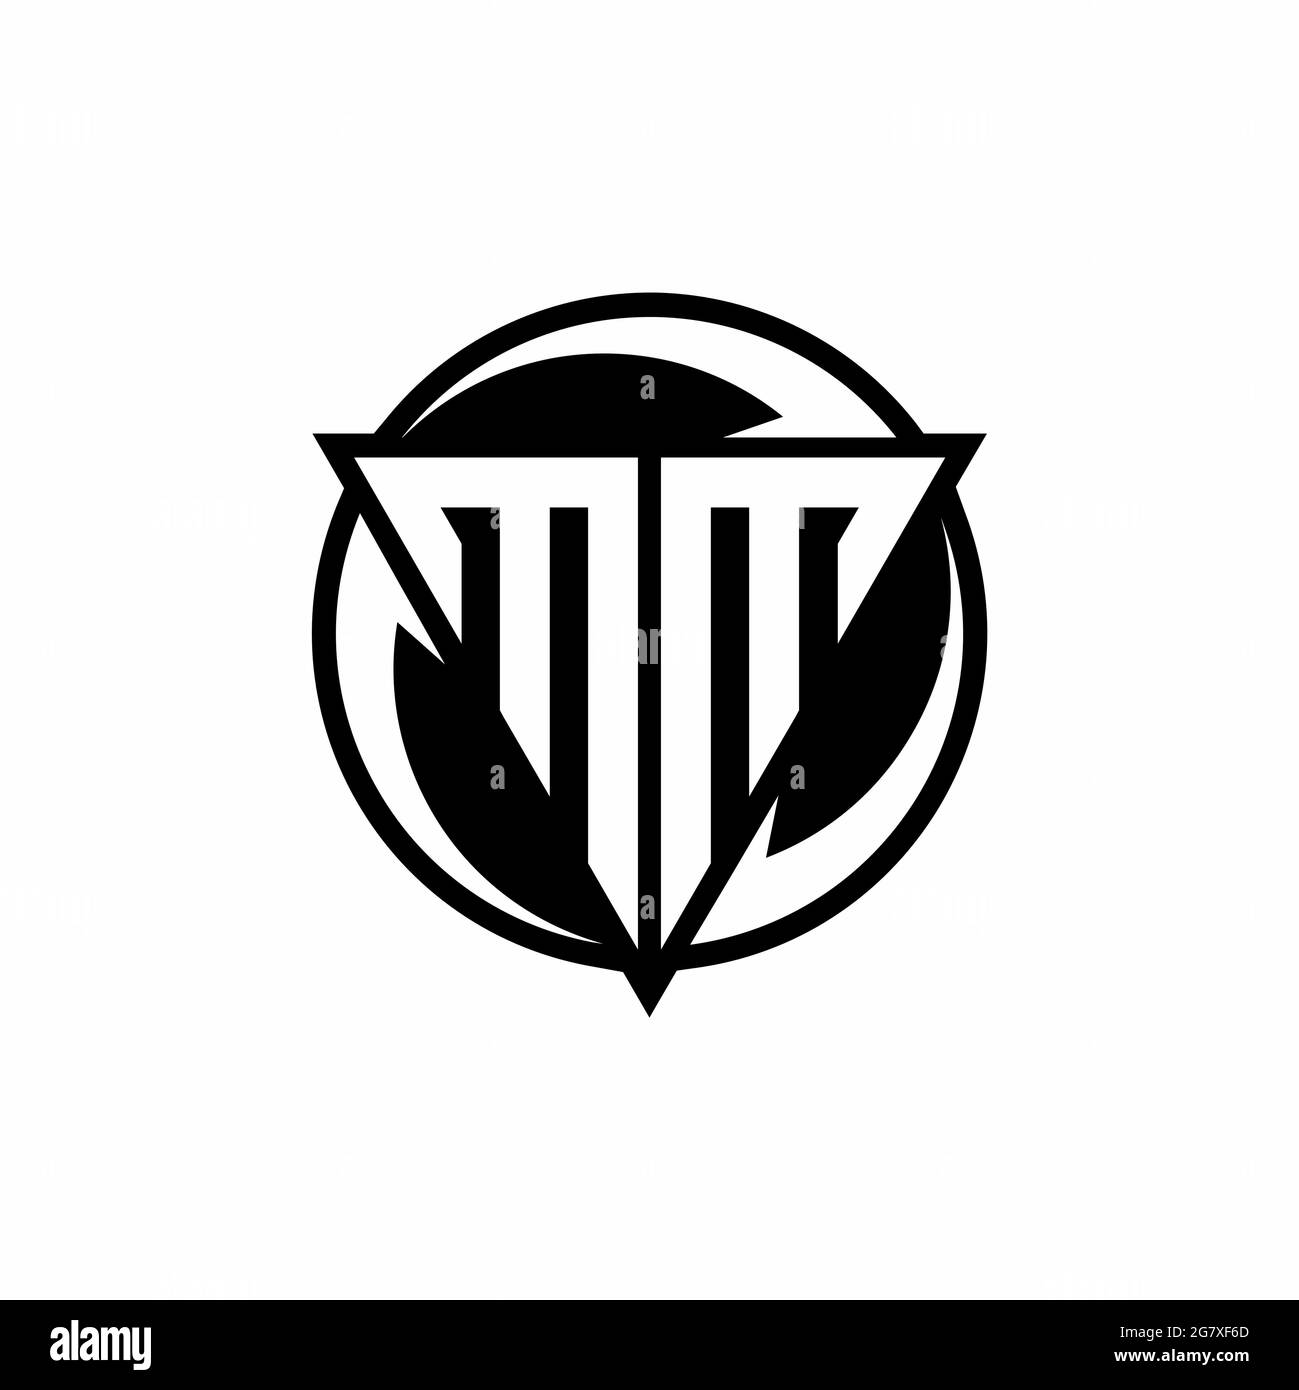 Mm monogram logo with modern triangle style Vector Image